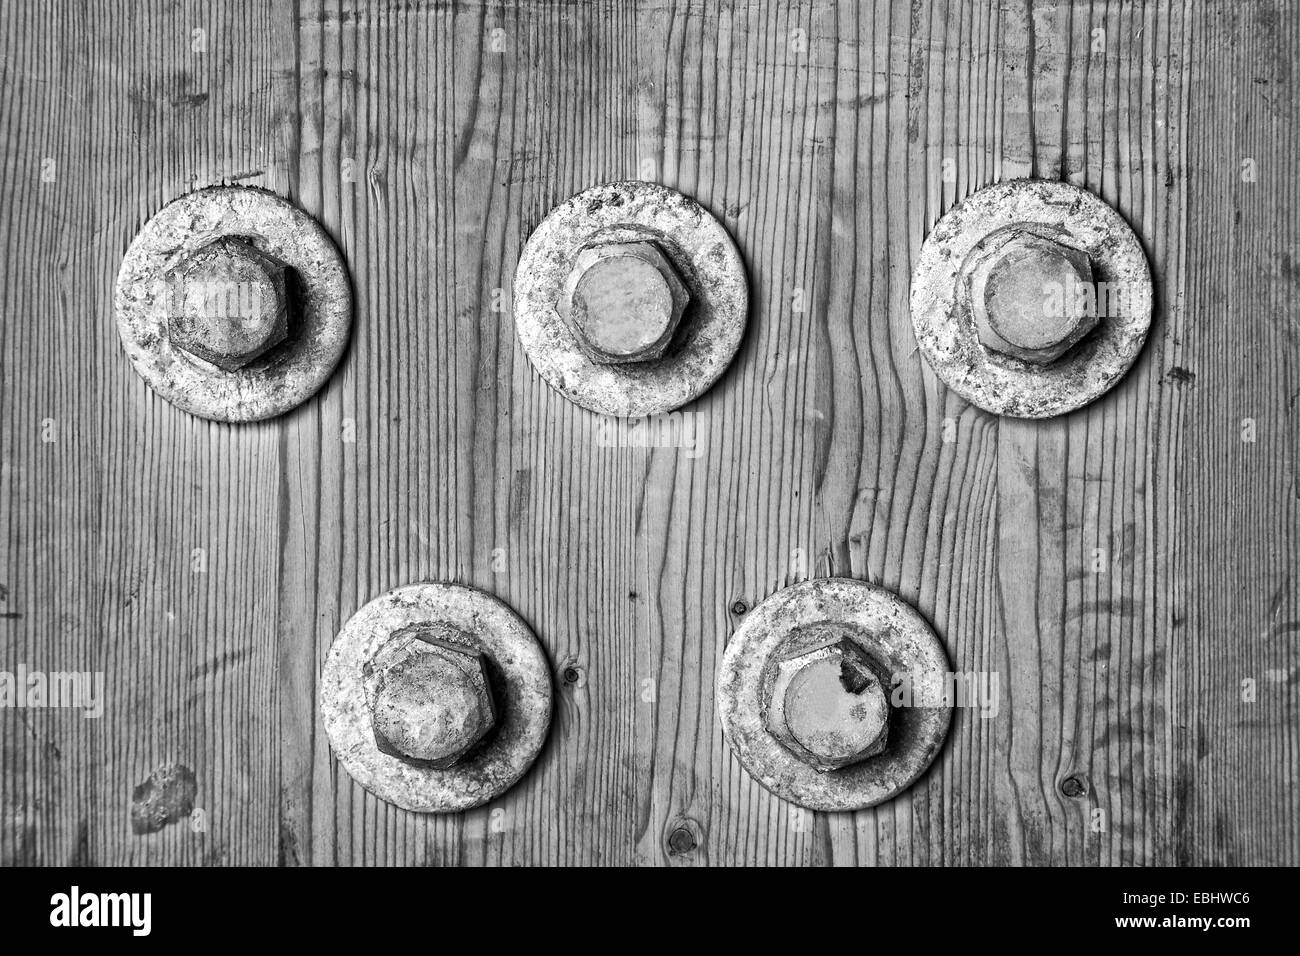 Five steel nuts fixed on wood Stock Photo